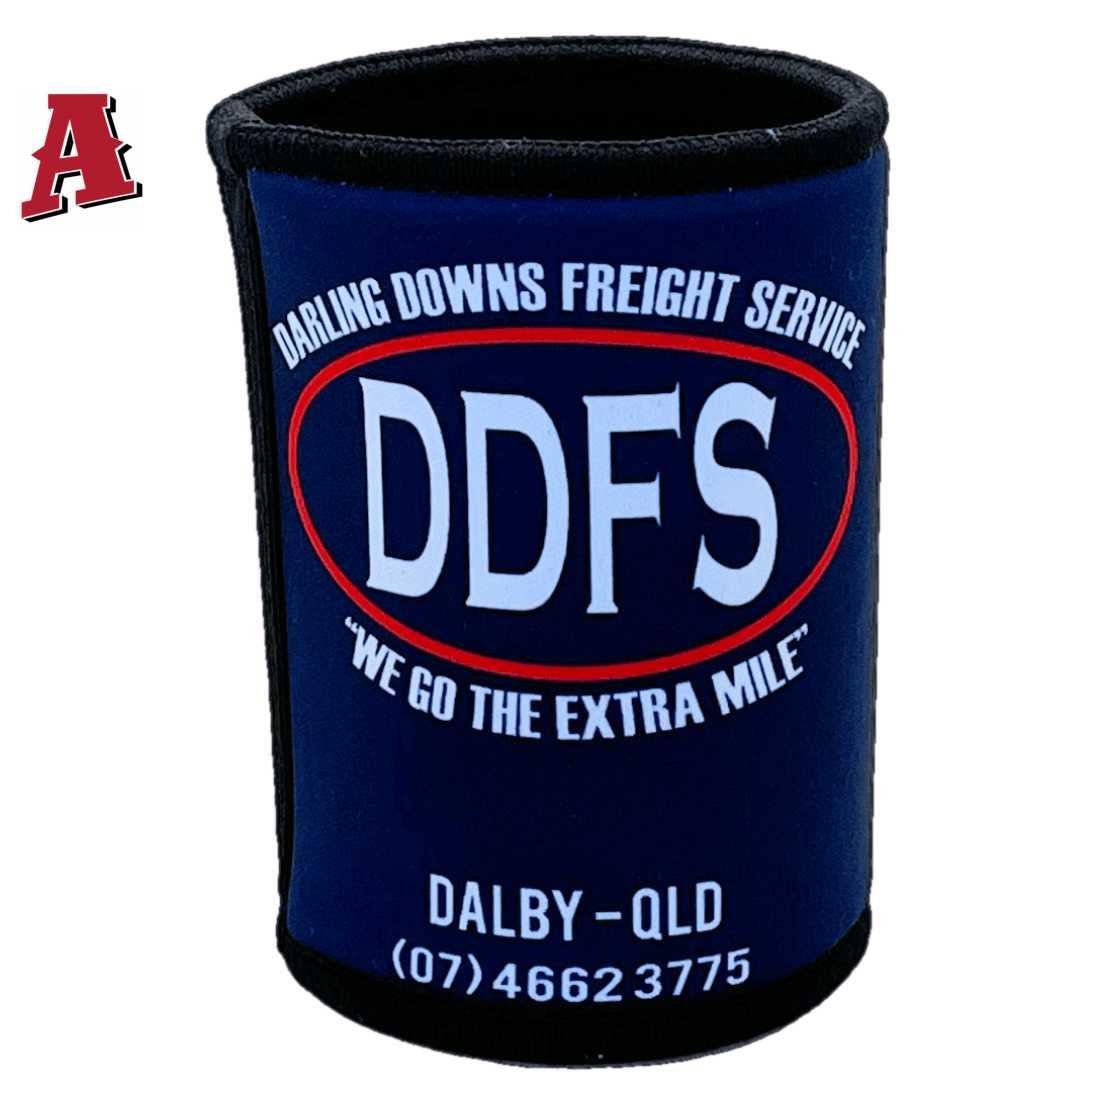 Darling Downs Freight Service Dalby QLD Custom Stubby Holder Koozie 5mm Neoprene Glued Stitched Top Bottom Seams Navy